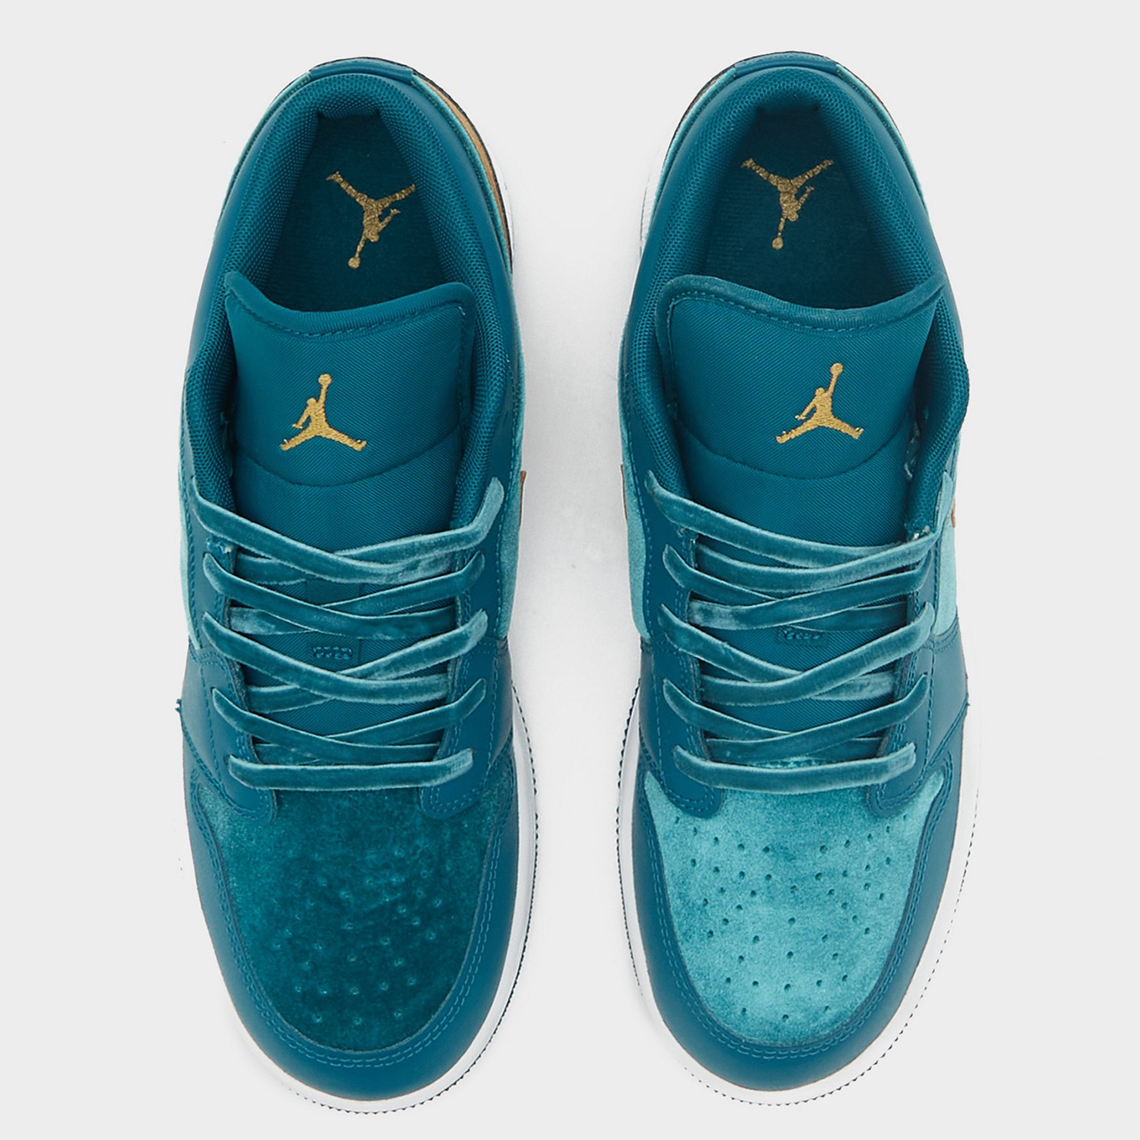 Jordan Brand quietly slipped in a new rendition of the low-top Air Low Gs Teal Velvet 1